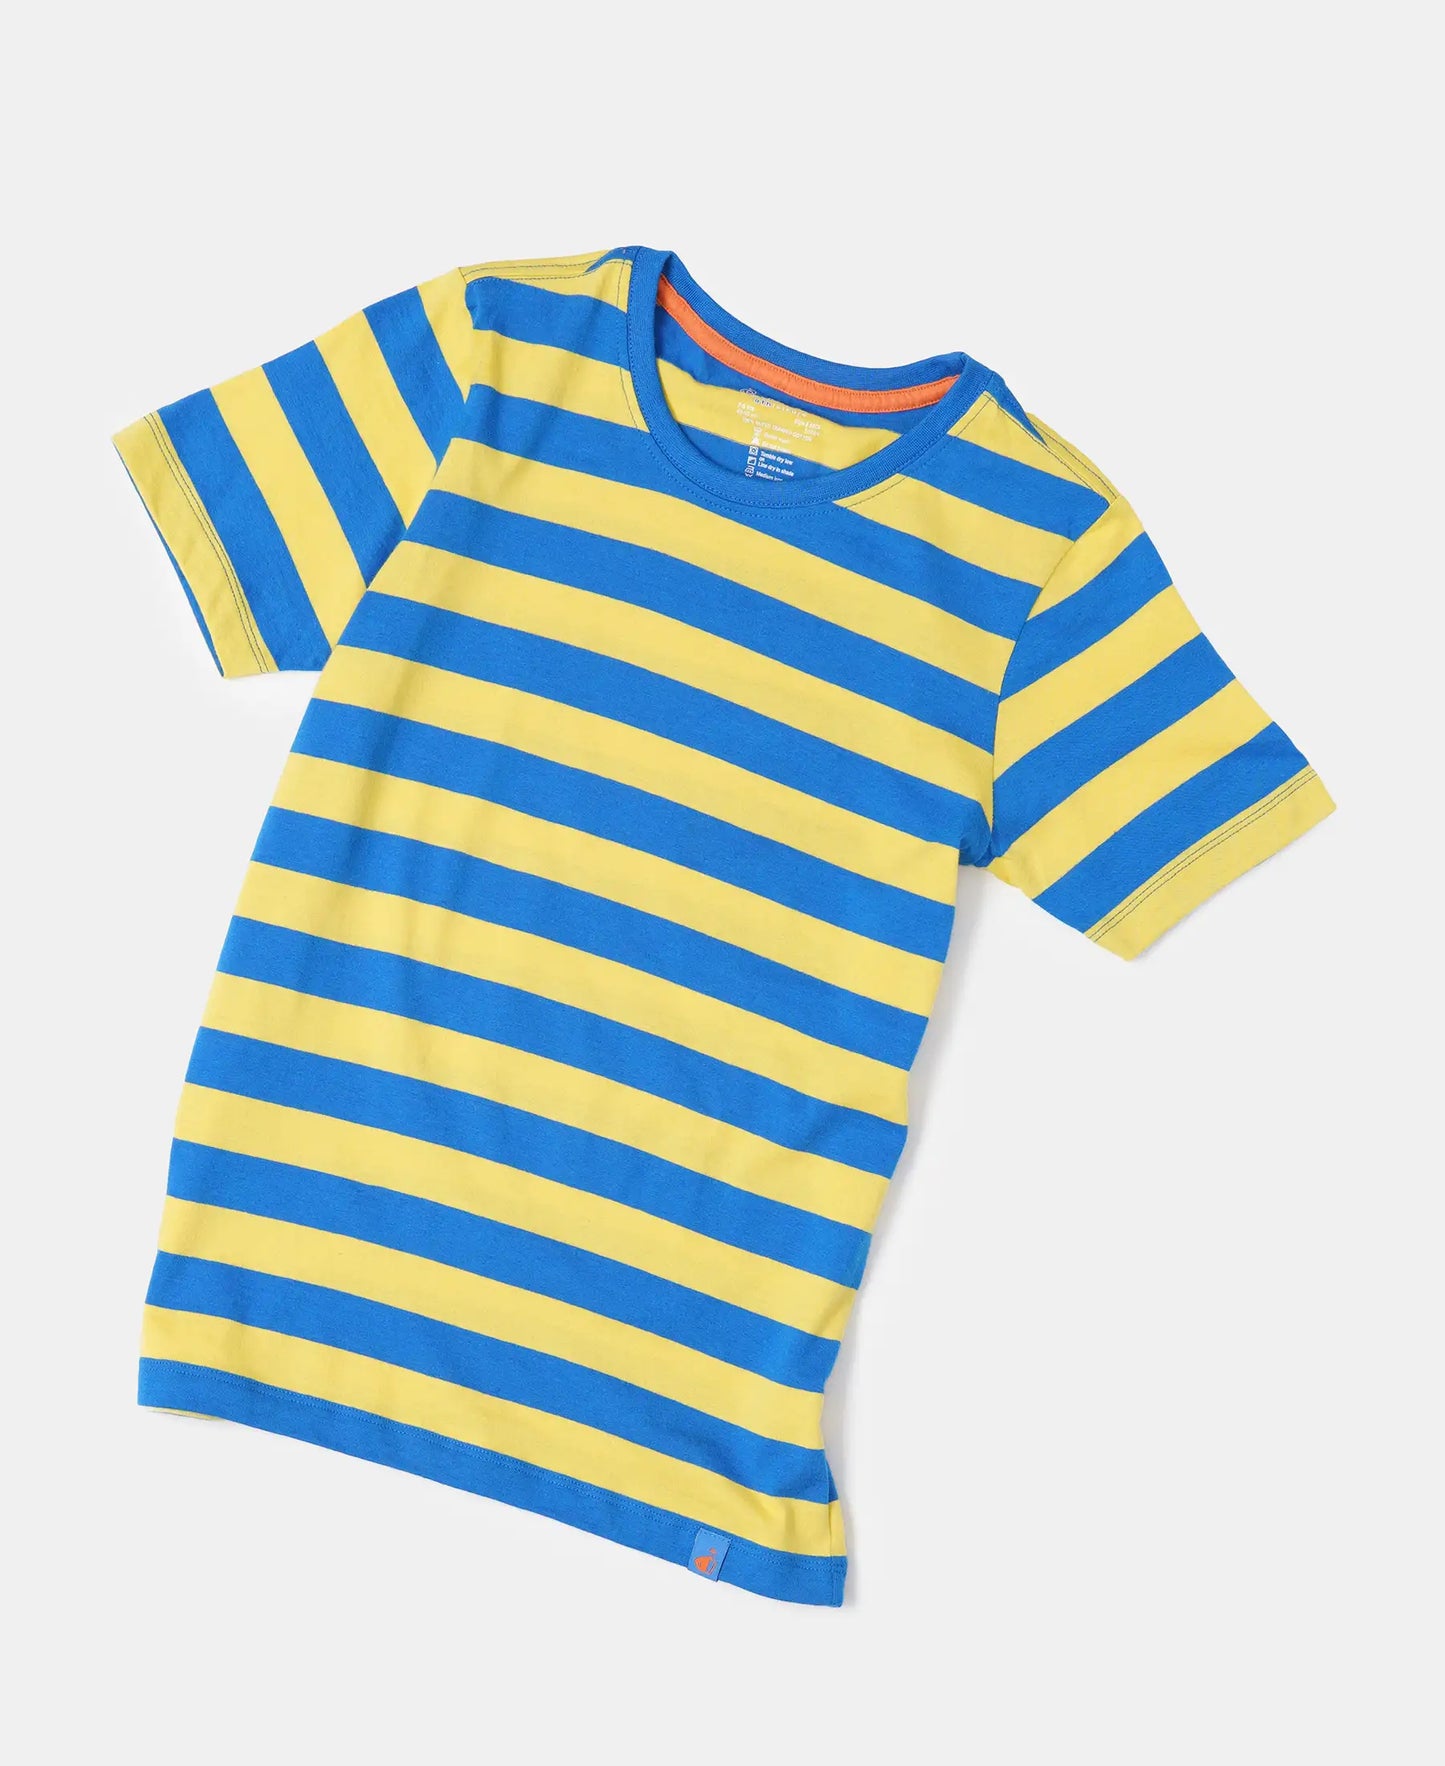 Super Combed Cotton Striped Half Sleeve T-Shirt - Neon Blue & Maize-5